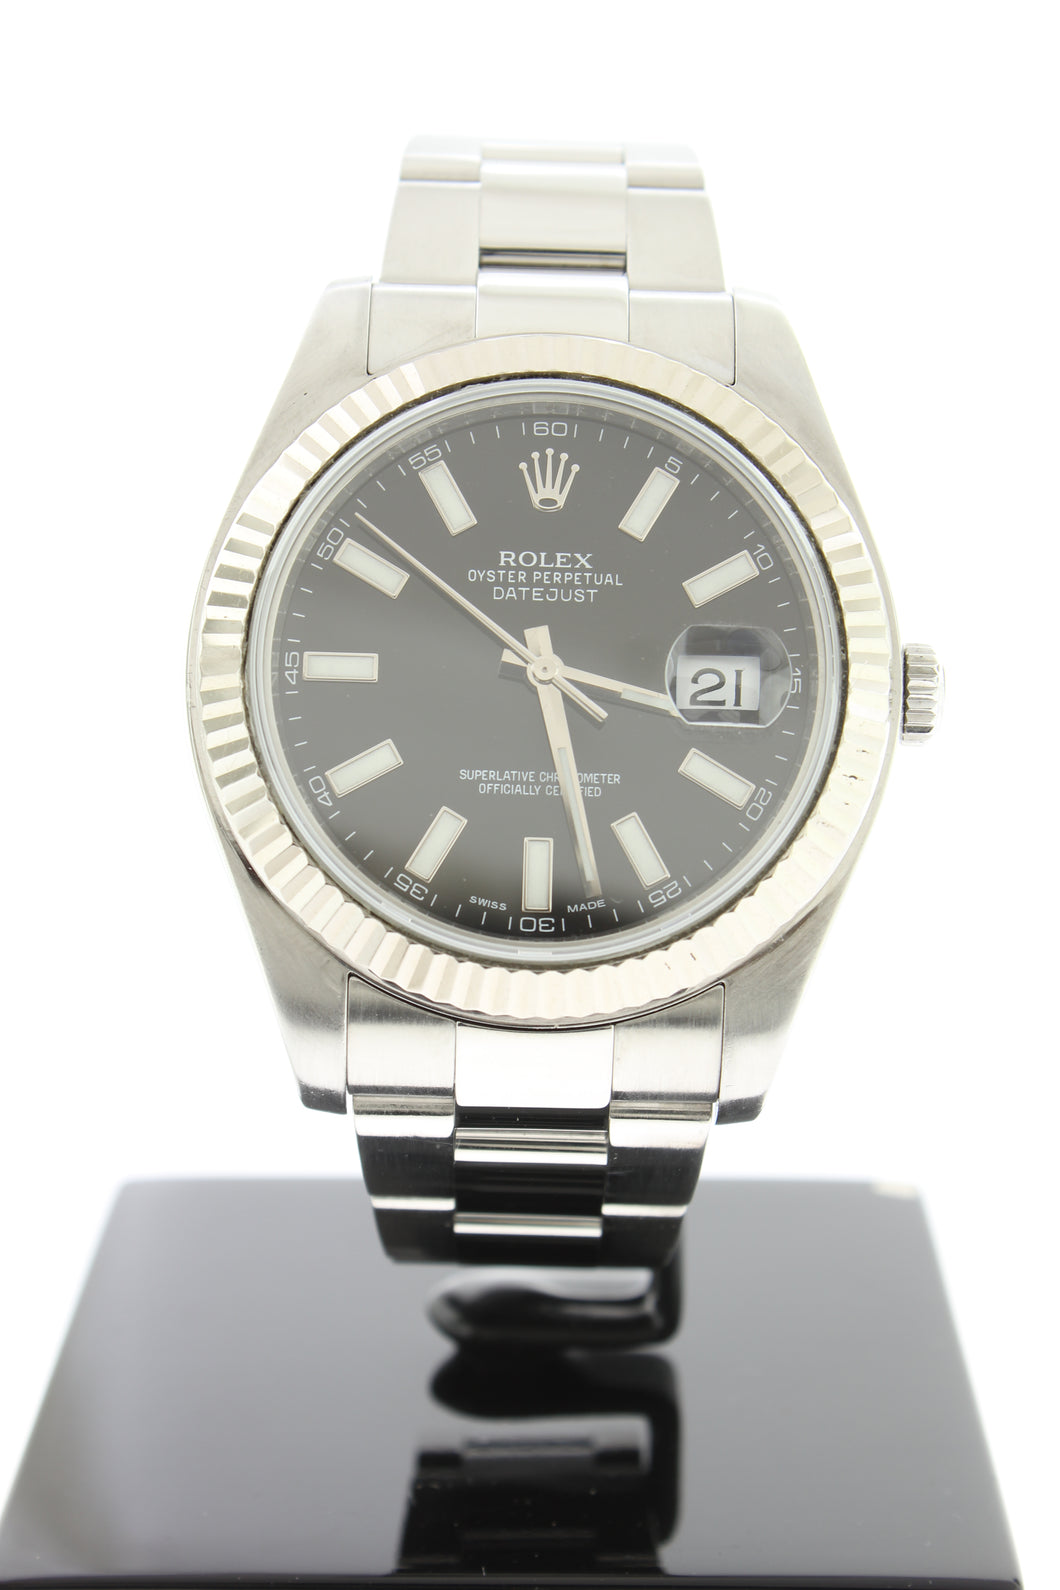 Rolex Datejust II Stainless Steel Oyster Black Dial 18K White Gold Fluted Bezel 41mm 116334 - Arnik Jewellers